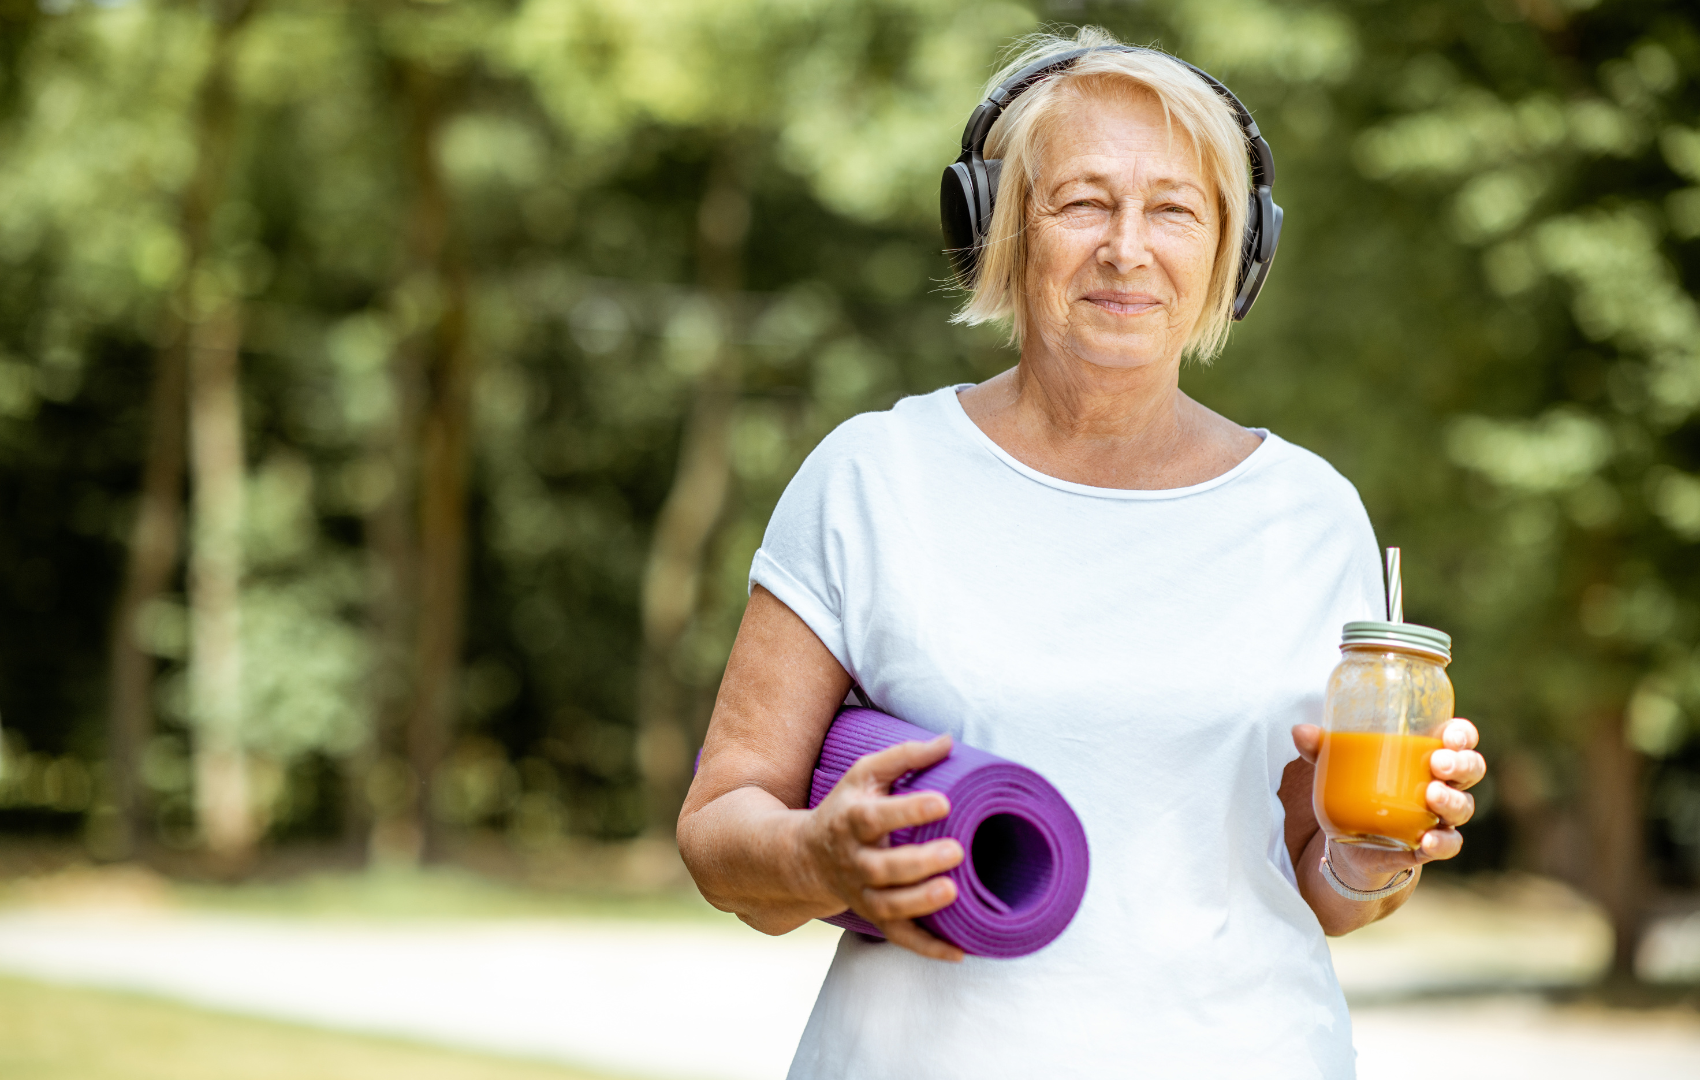 Embracing podcasts as a healthy pastime for older people Image